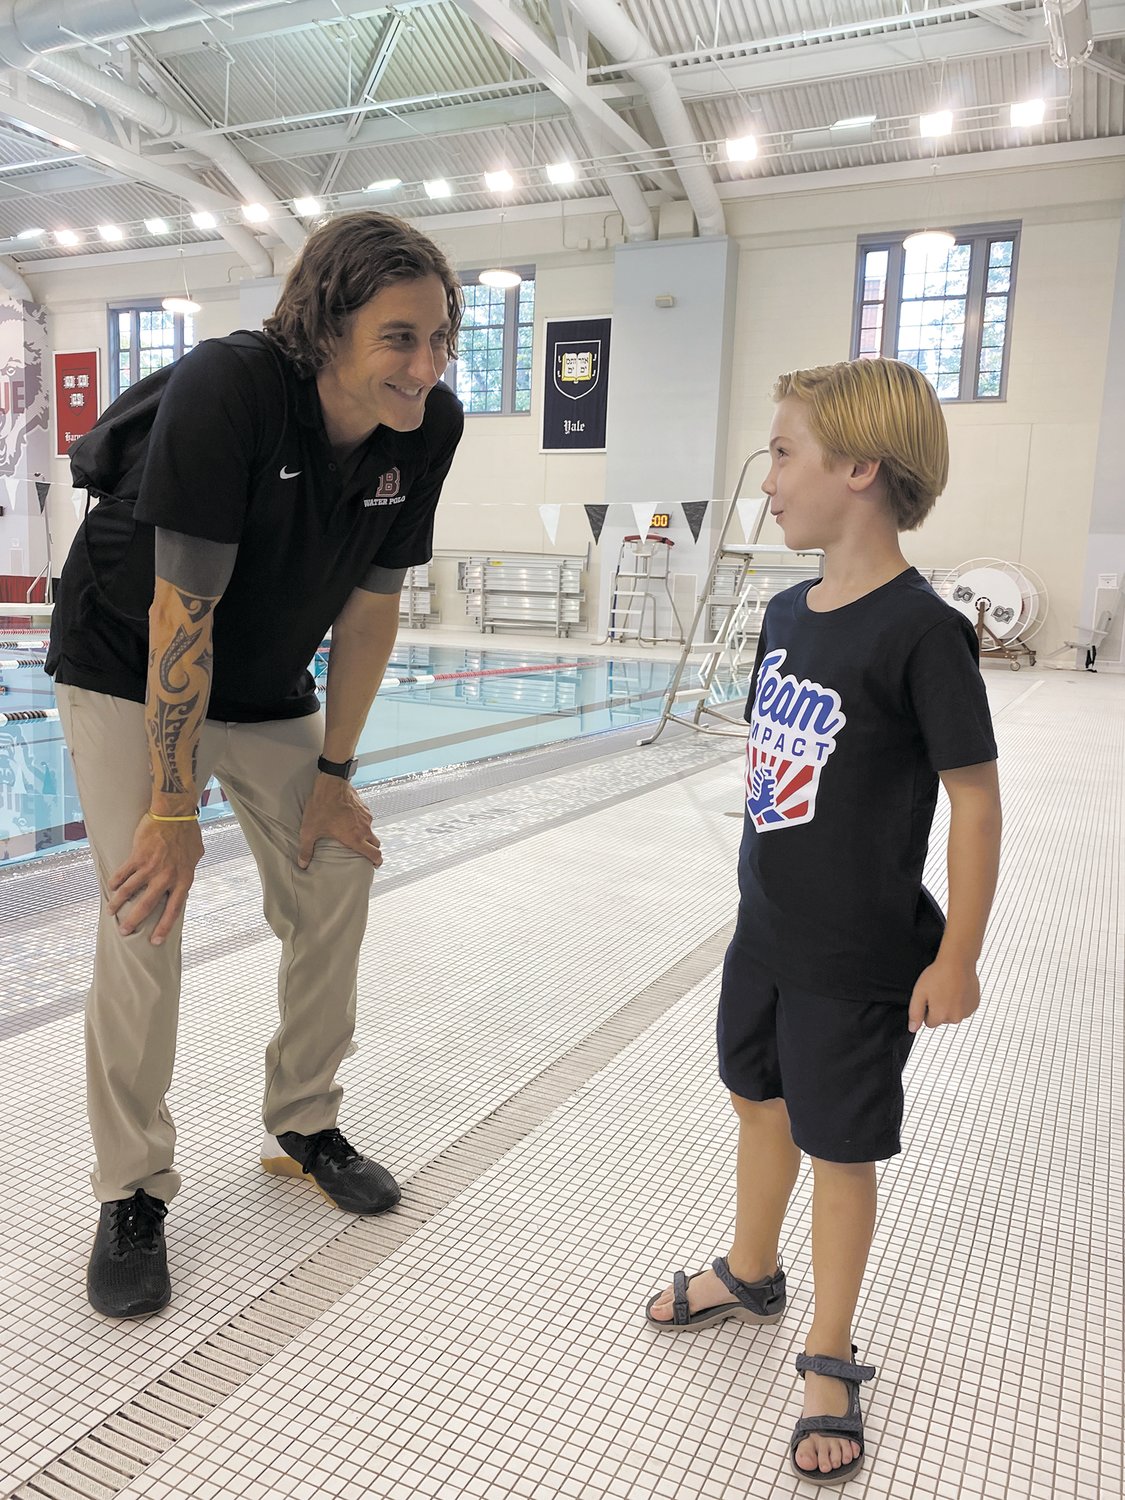 AT THE POOL: Assistant Coach JJ Addison and Shea Mathewson at Brown University’s pool.